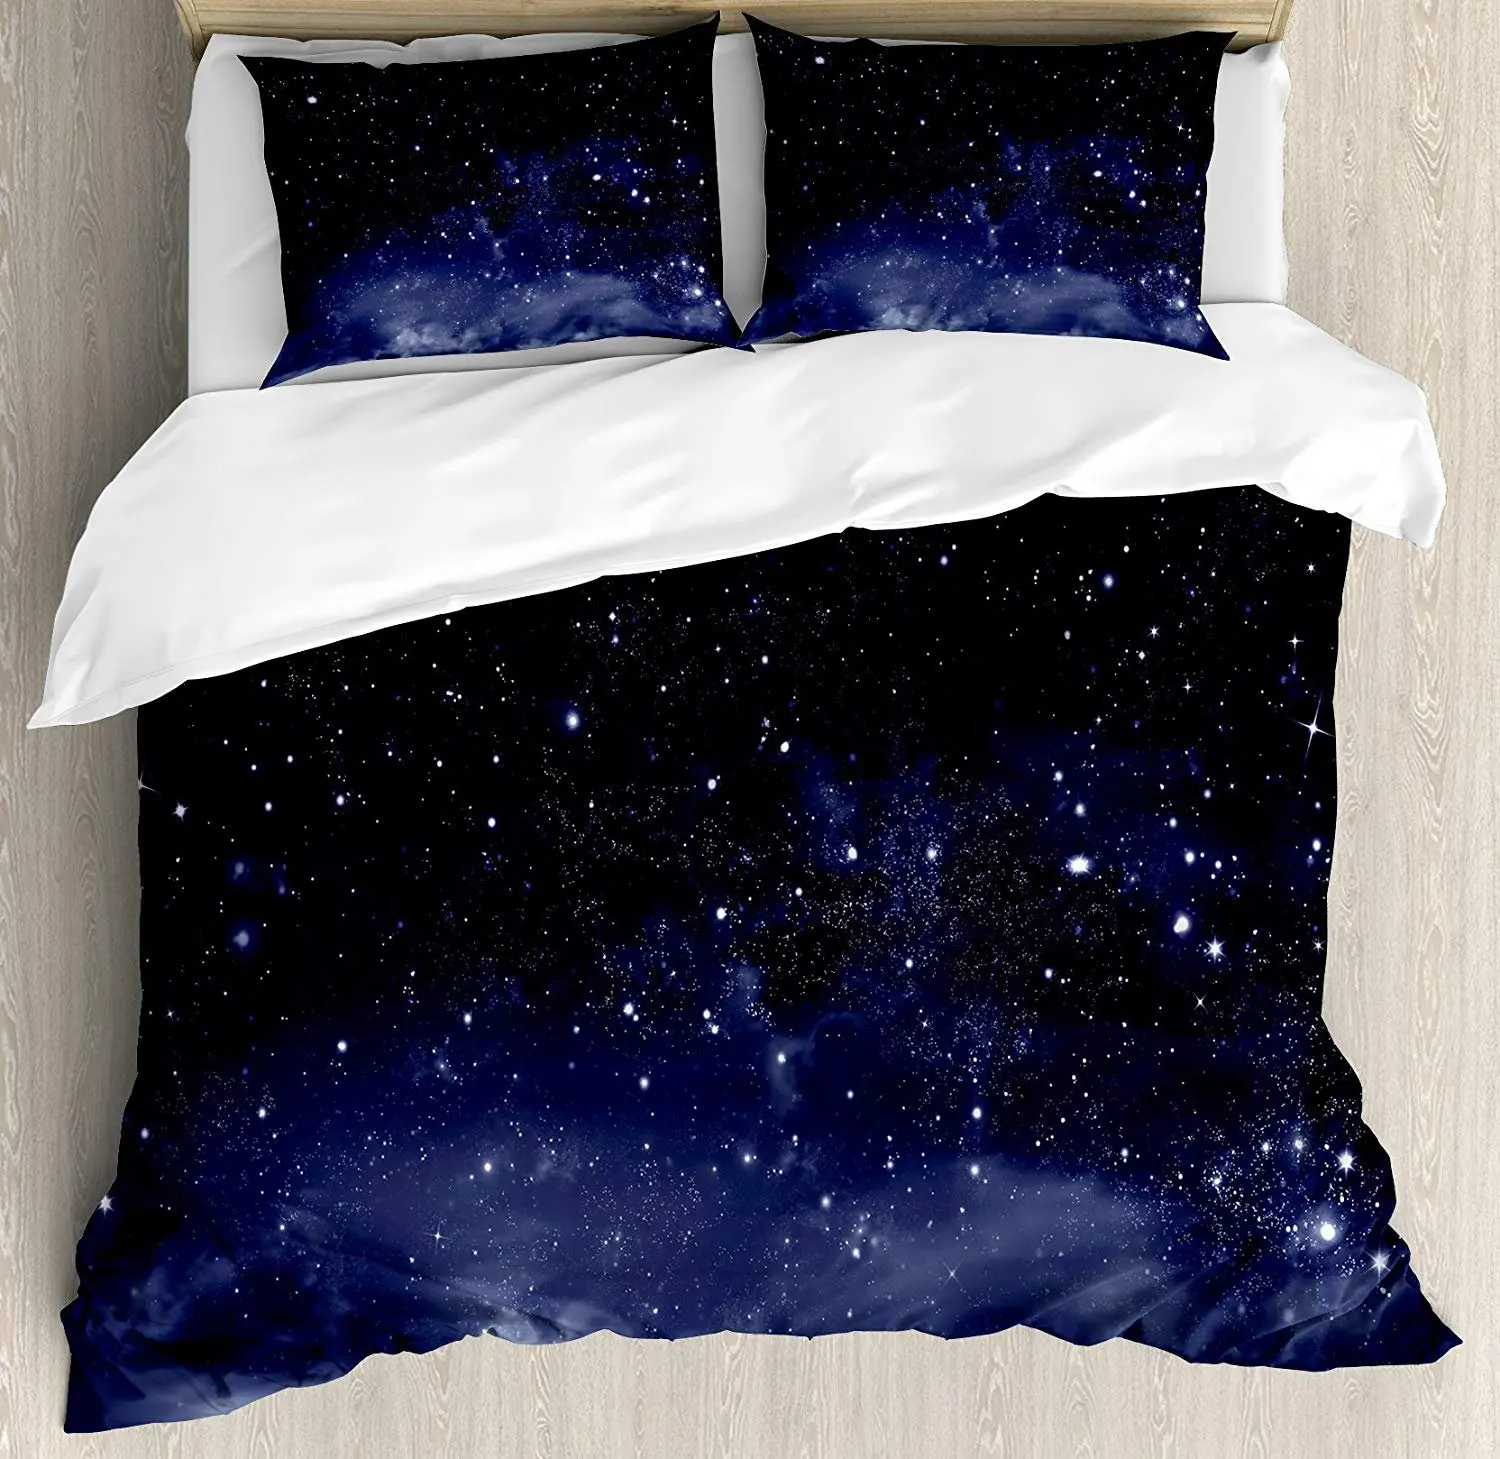 

Night Bedding Set Ethereal View of the Dark Sky Atmosphere Nebula Fantasy Cosmic Universe Duvet Cover Pillowcase Bed Set